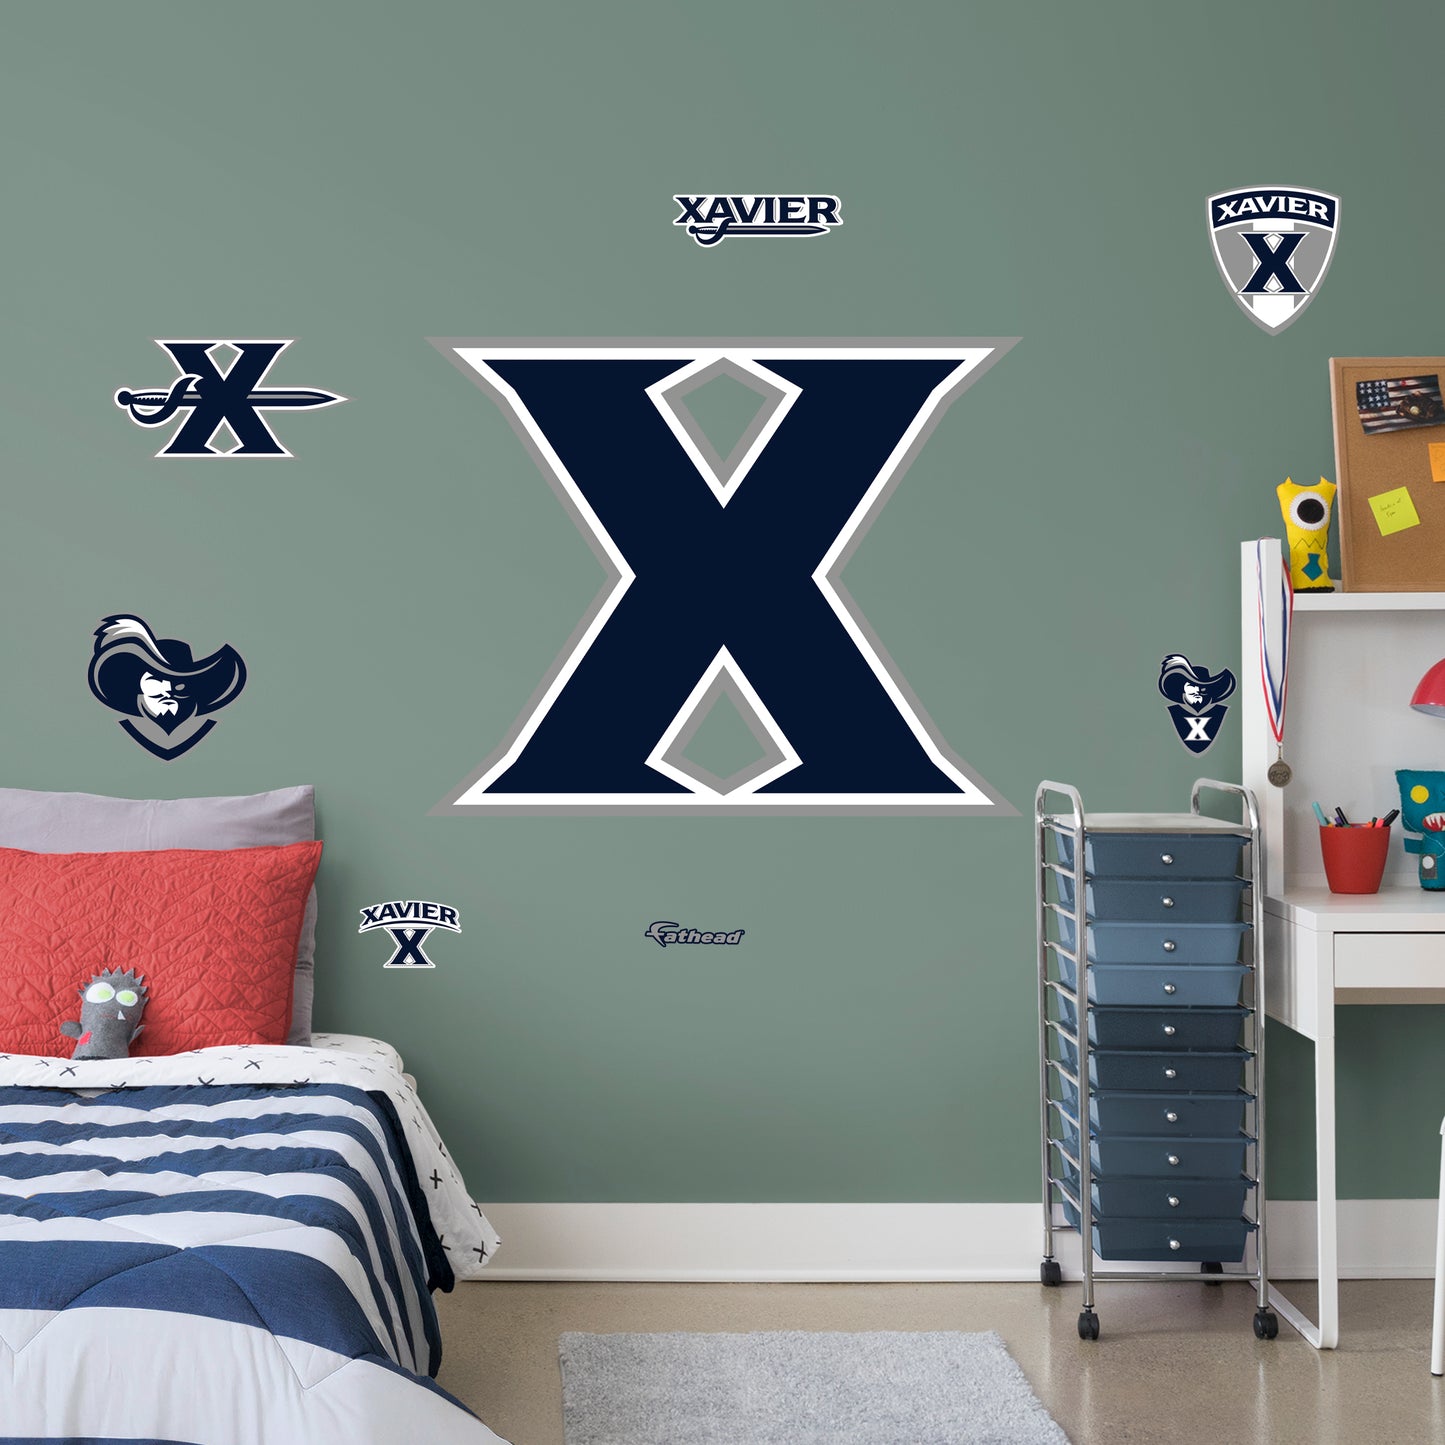 Xavier Musketeers 2020 RealBig Logo  - Officially Licensed NCAA Removable Wall Decal